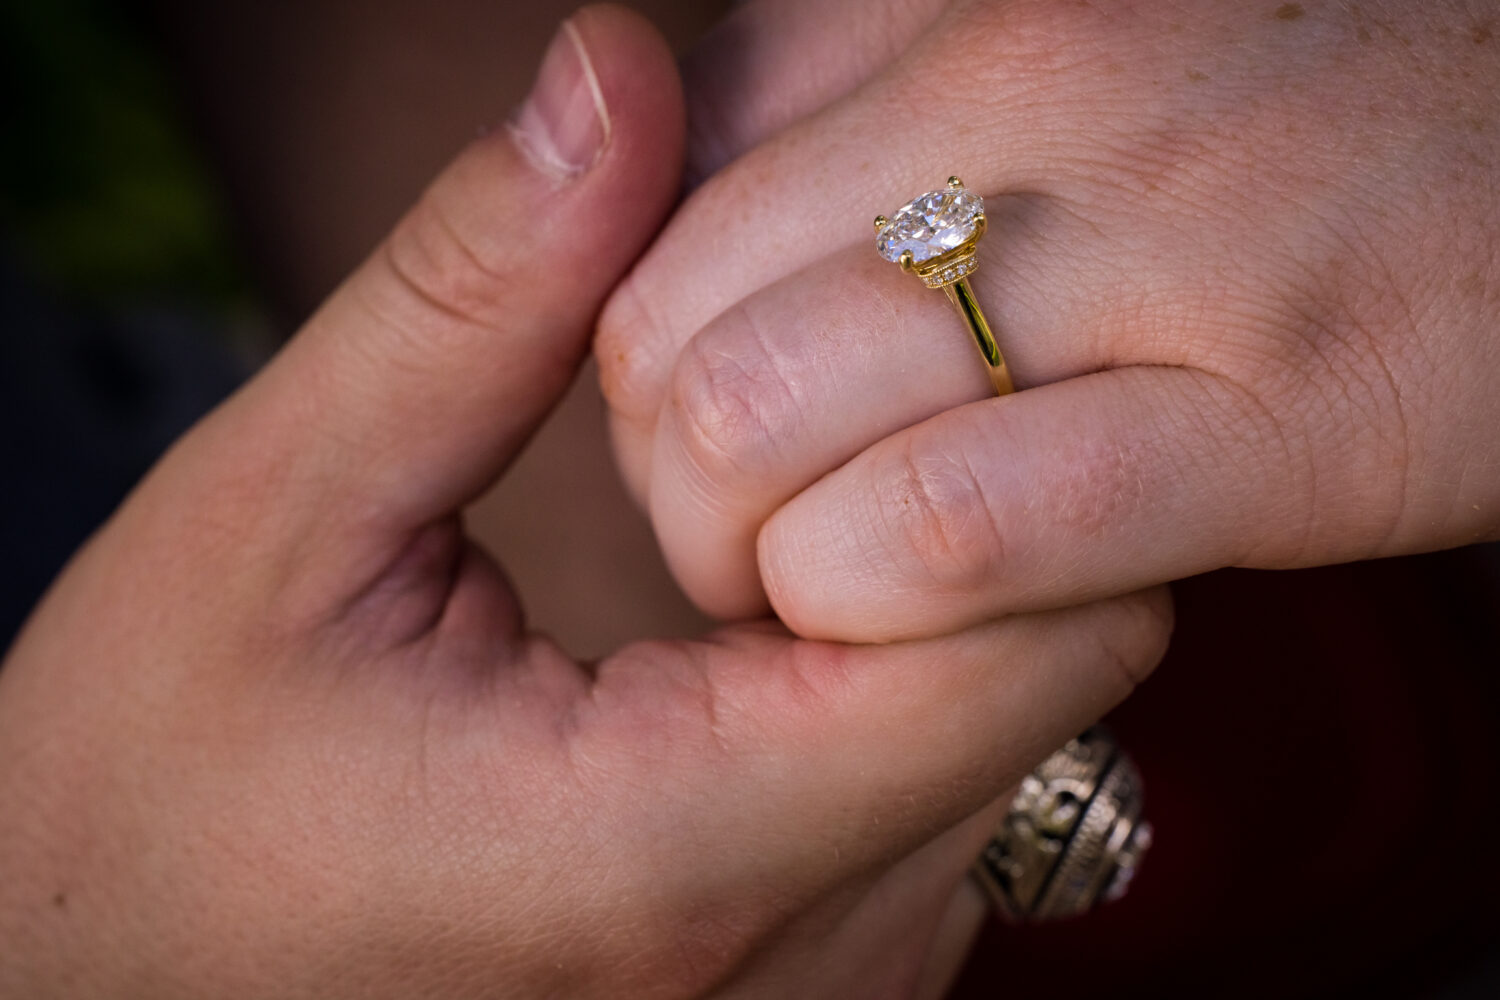 rhinehart photography, captures this close up image of the couple as they are holding hands and showing off the new ring 